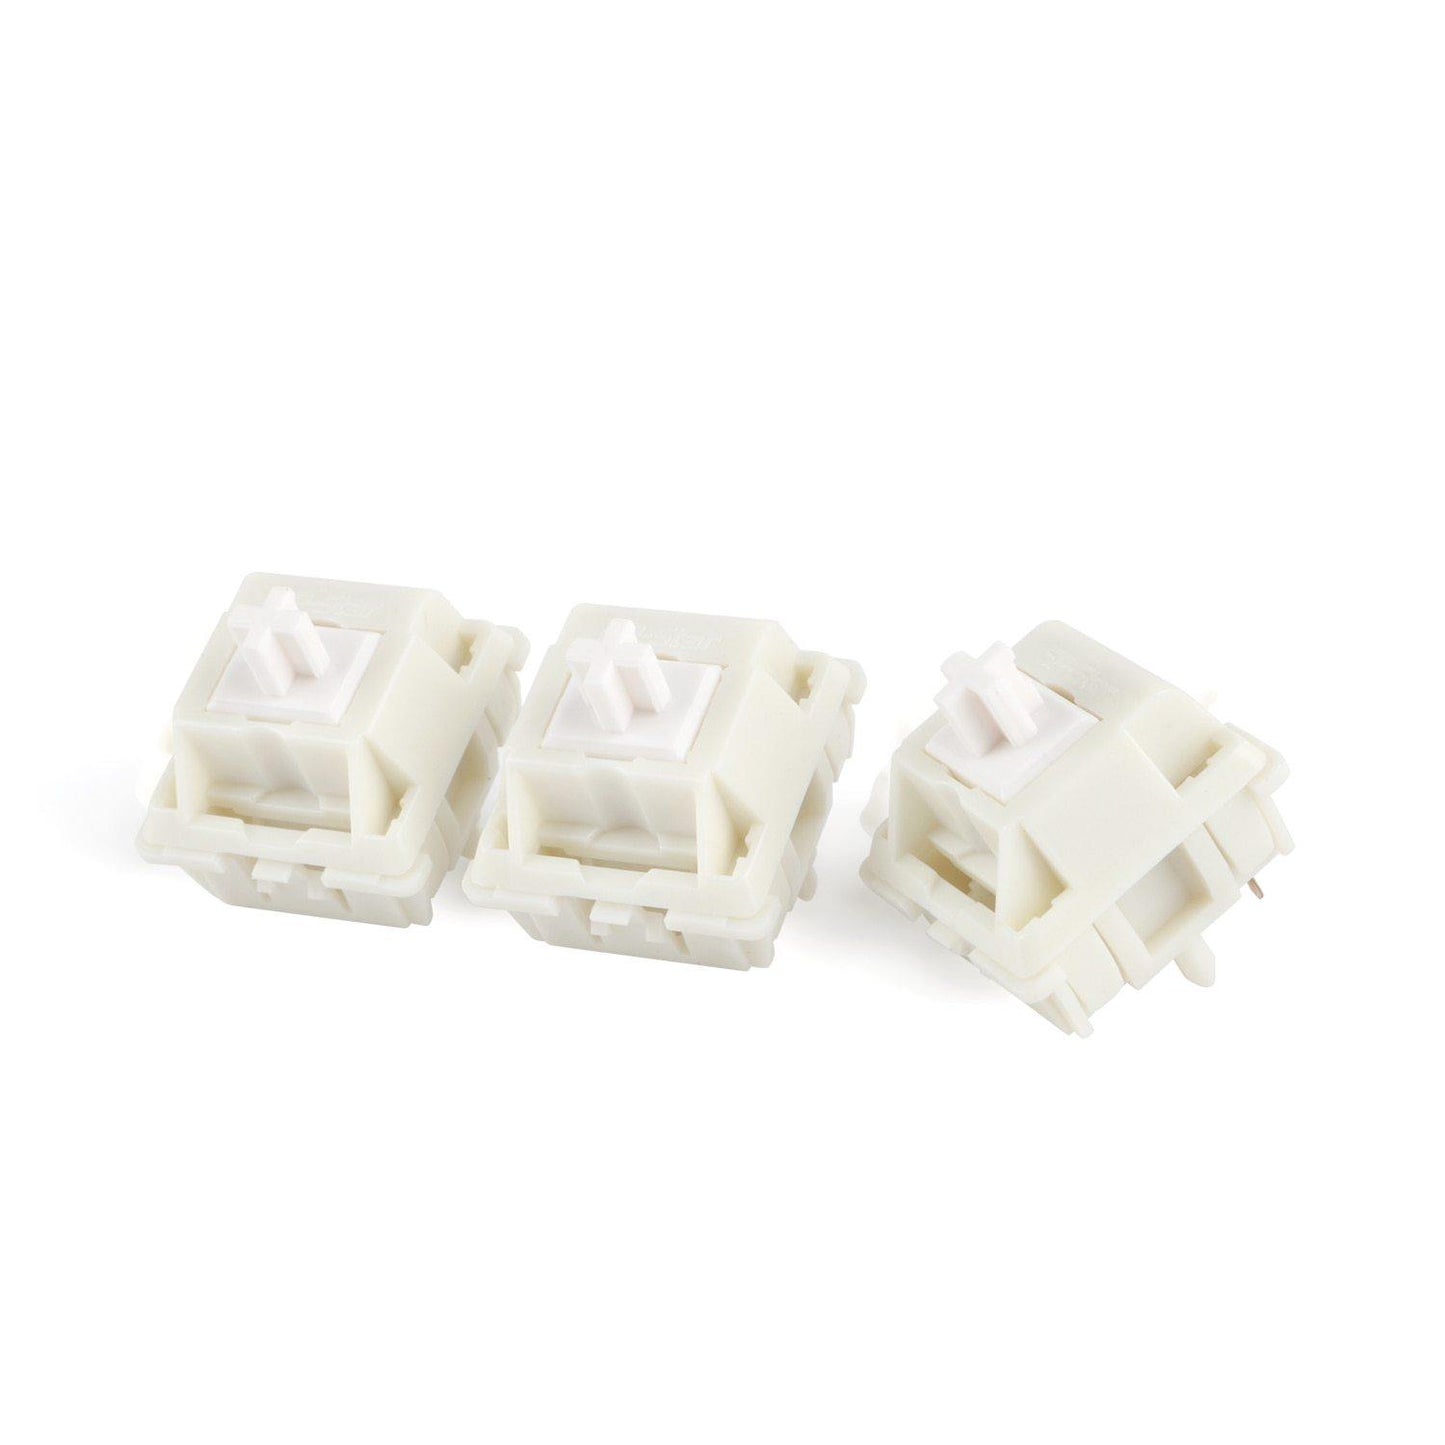 SP-STAR POLE STARS WHITE LINEAR SWITCHES - THE KEYCAP CLUB